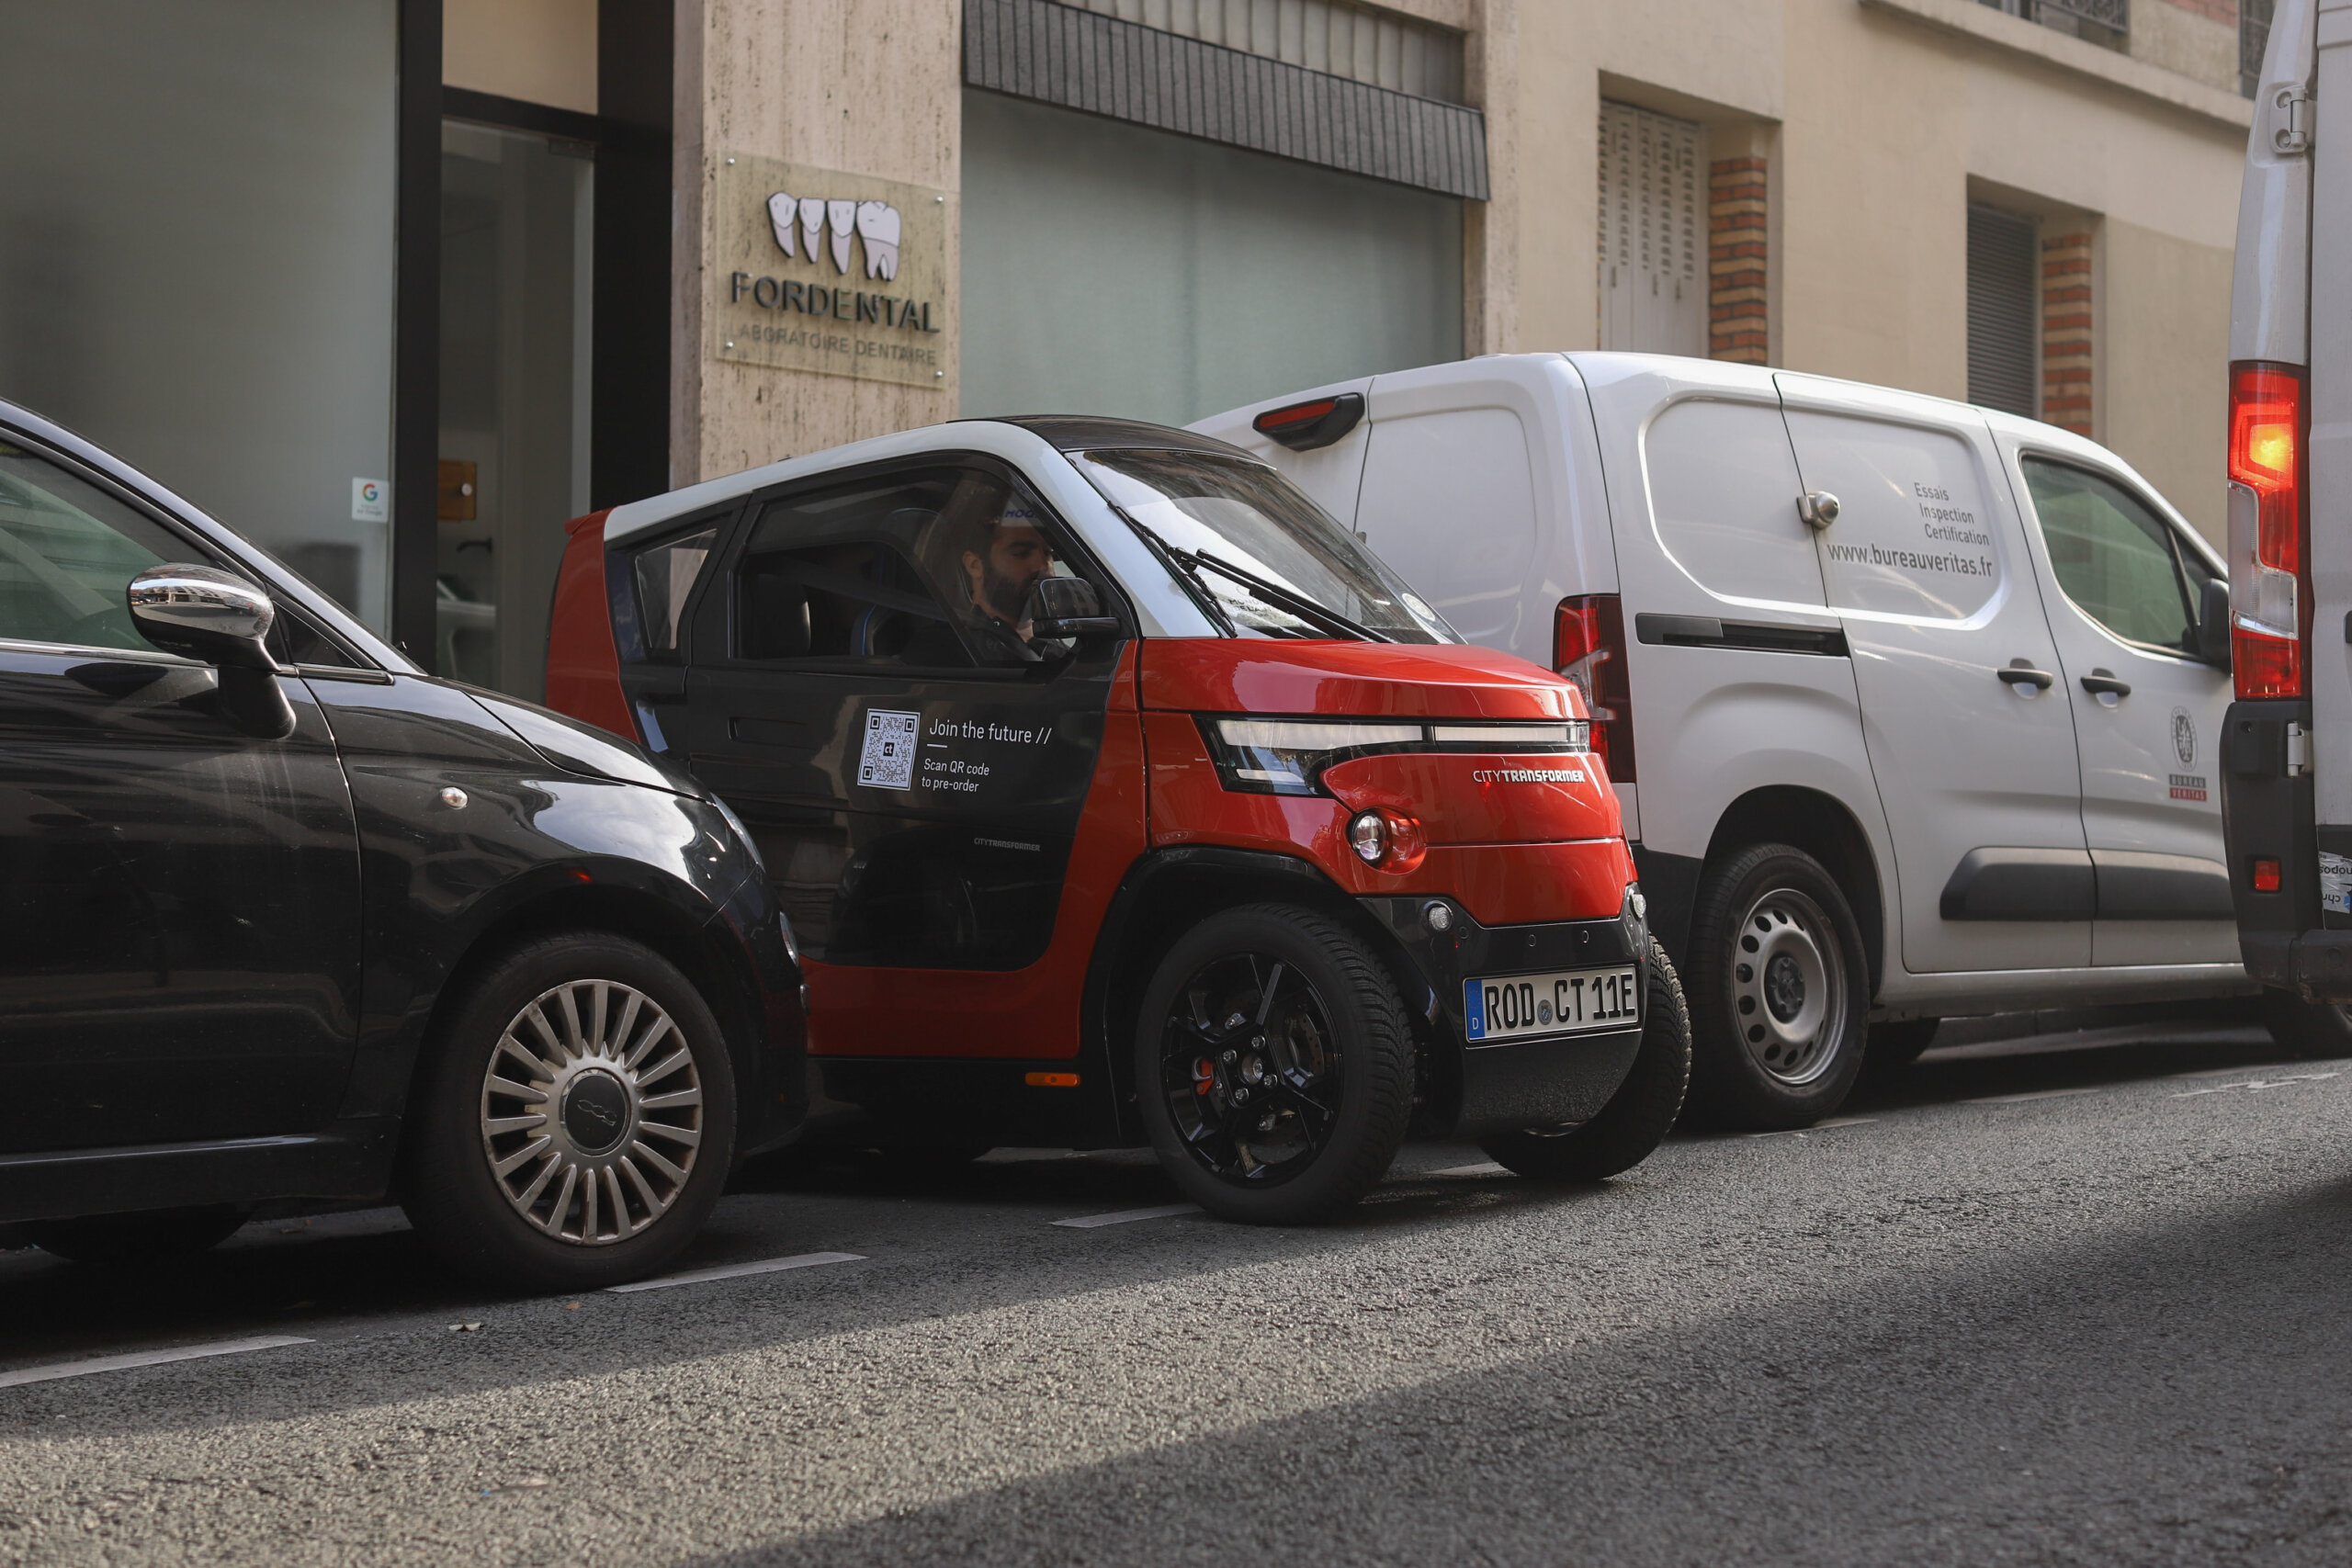 Citroen Ami electric urban mobility solution debuts globally at a